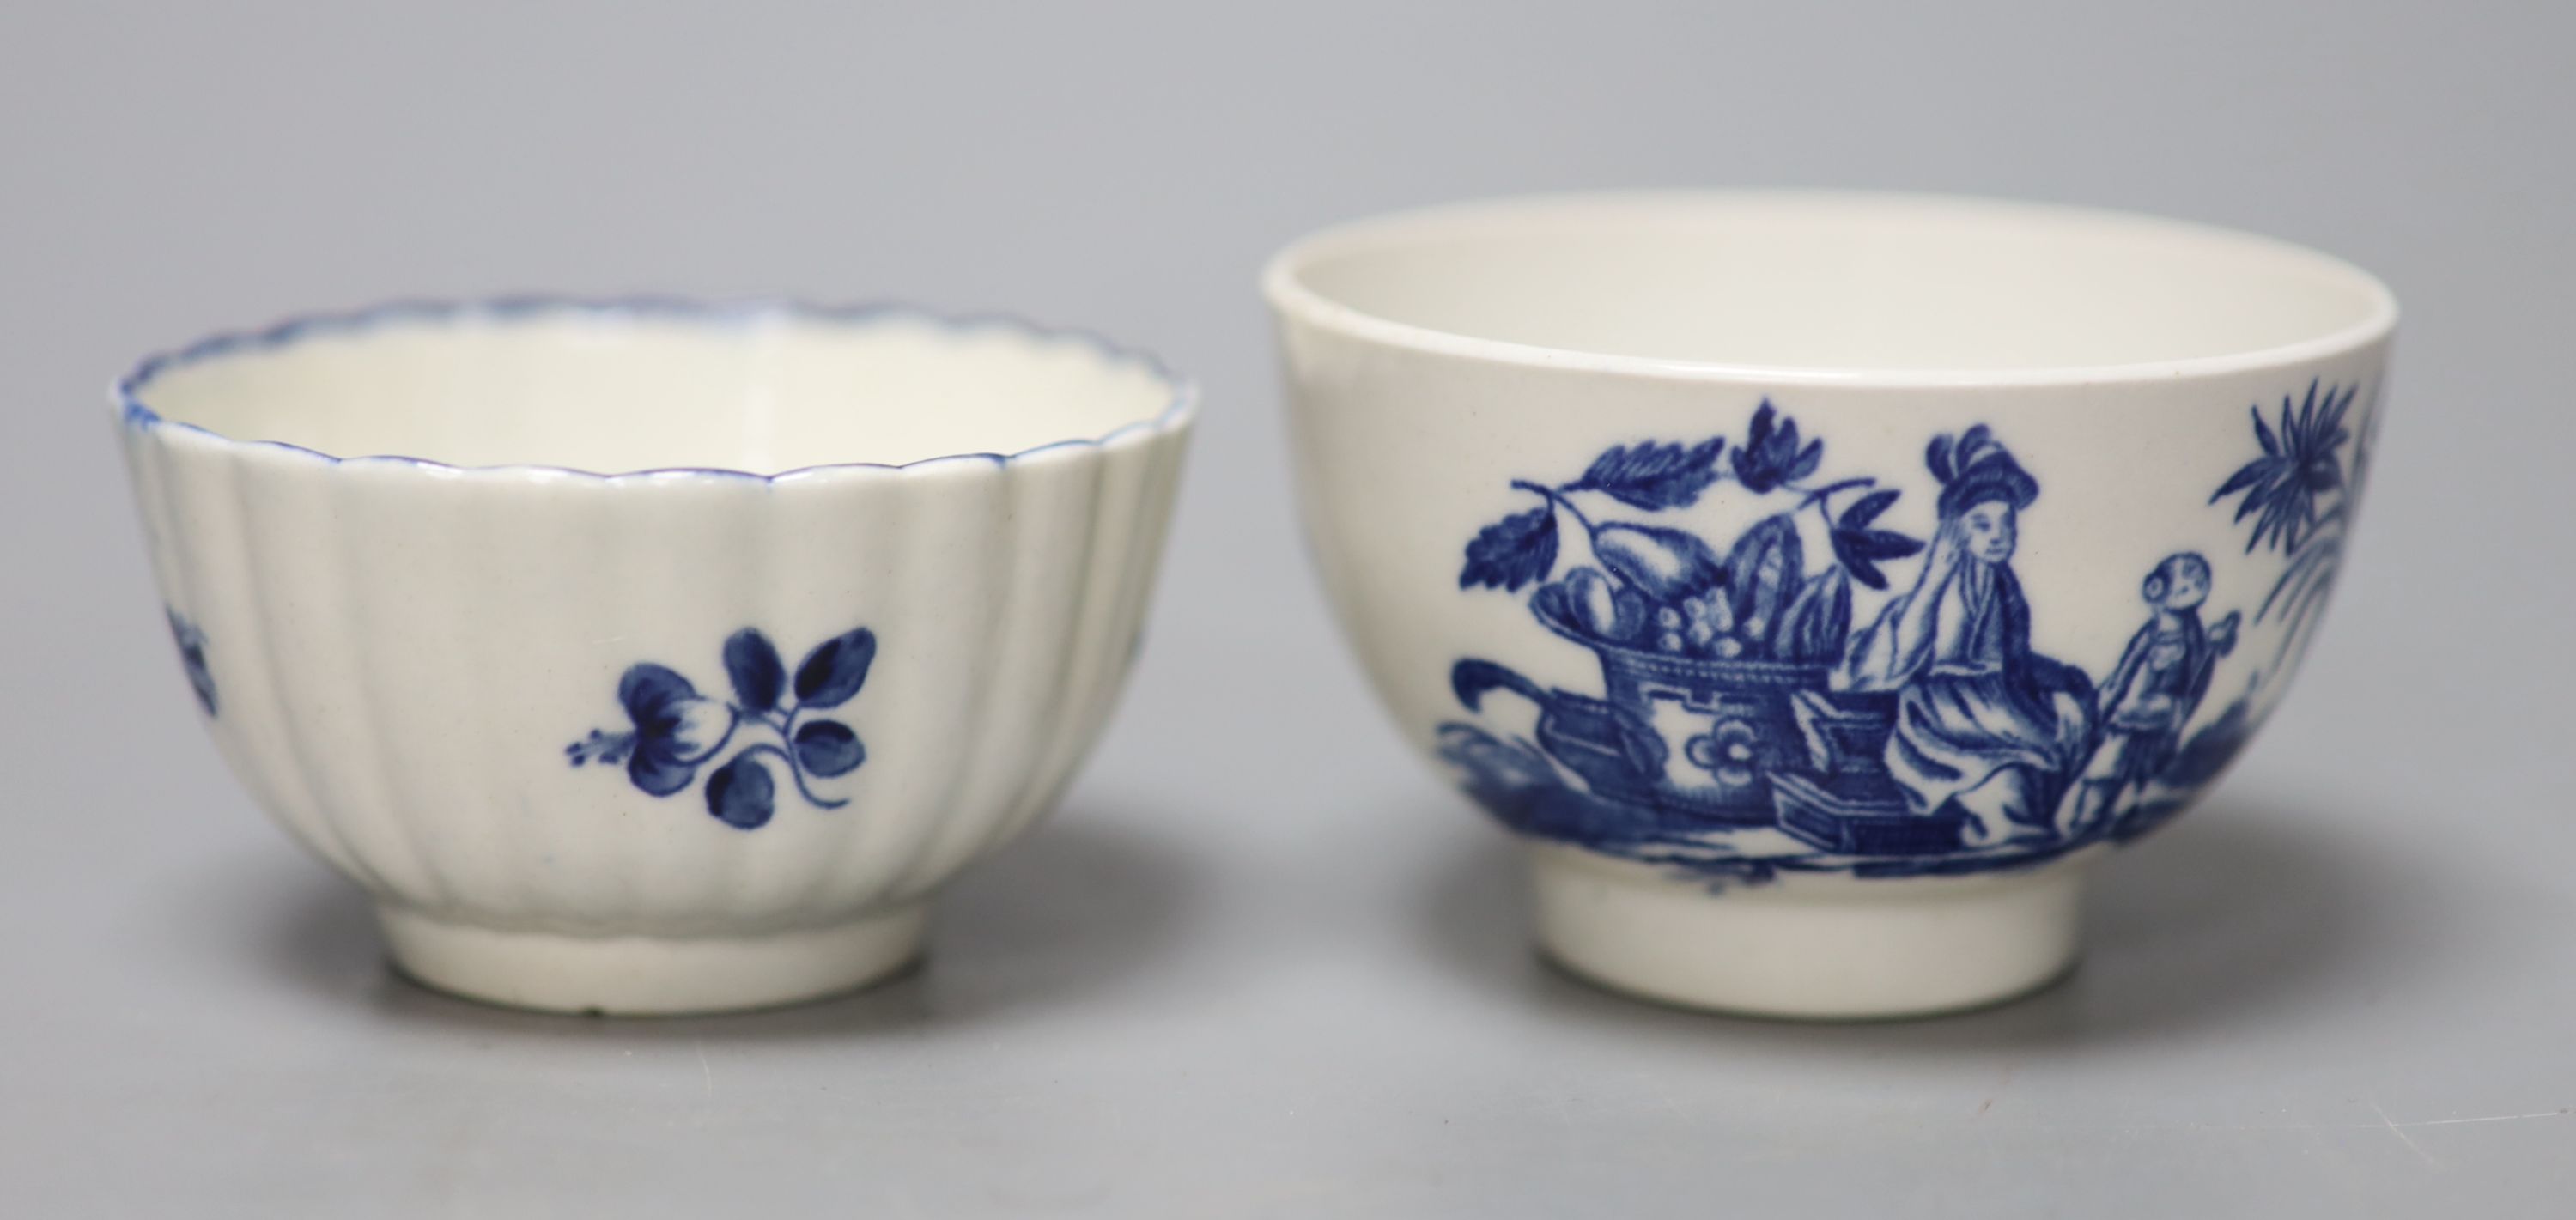 An 18th century Worcester teabowl and saucer Gilliflower pattern and another with mother and child - Image 5 of 7